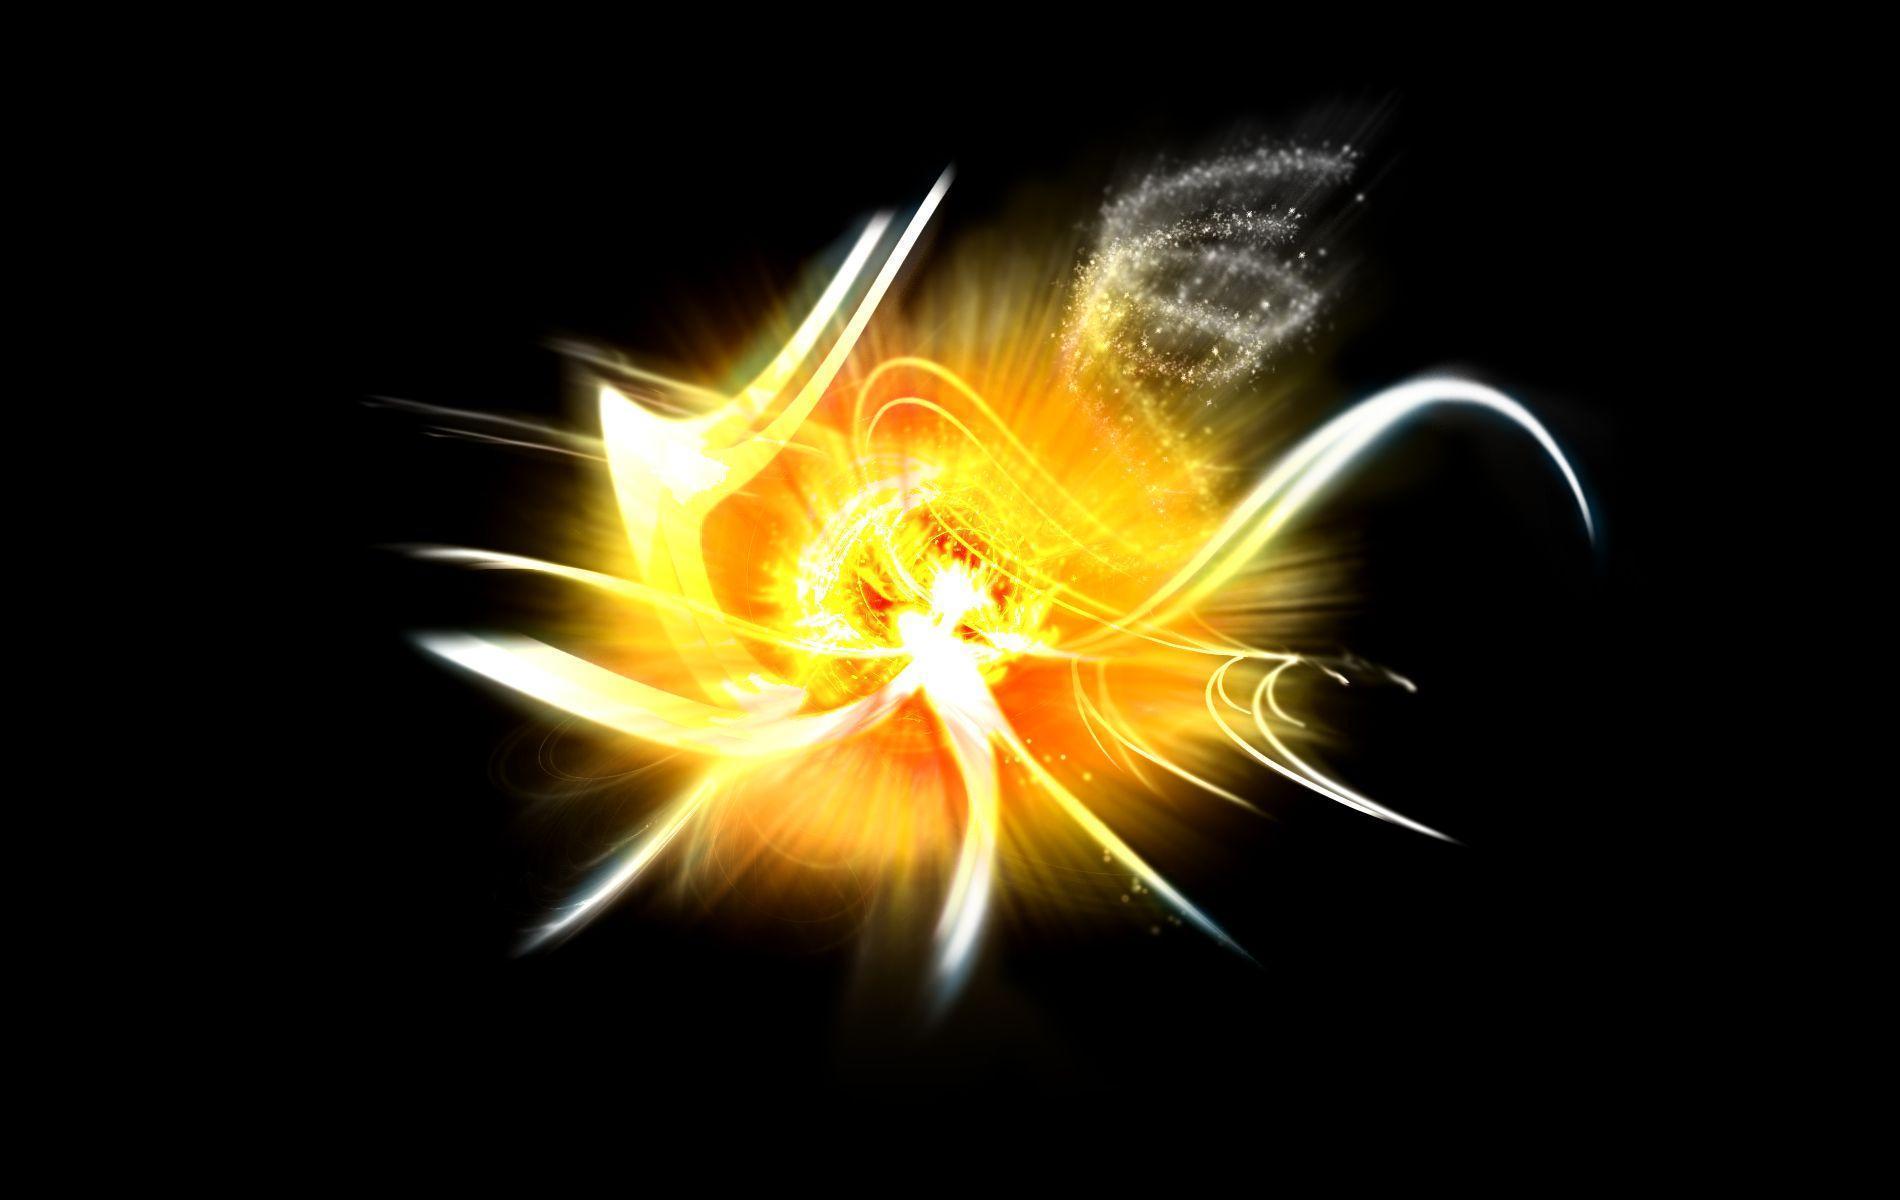 HD Explosion Wallpaper and Photo. HD Space Wallpaper